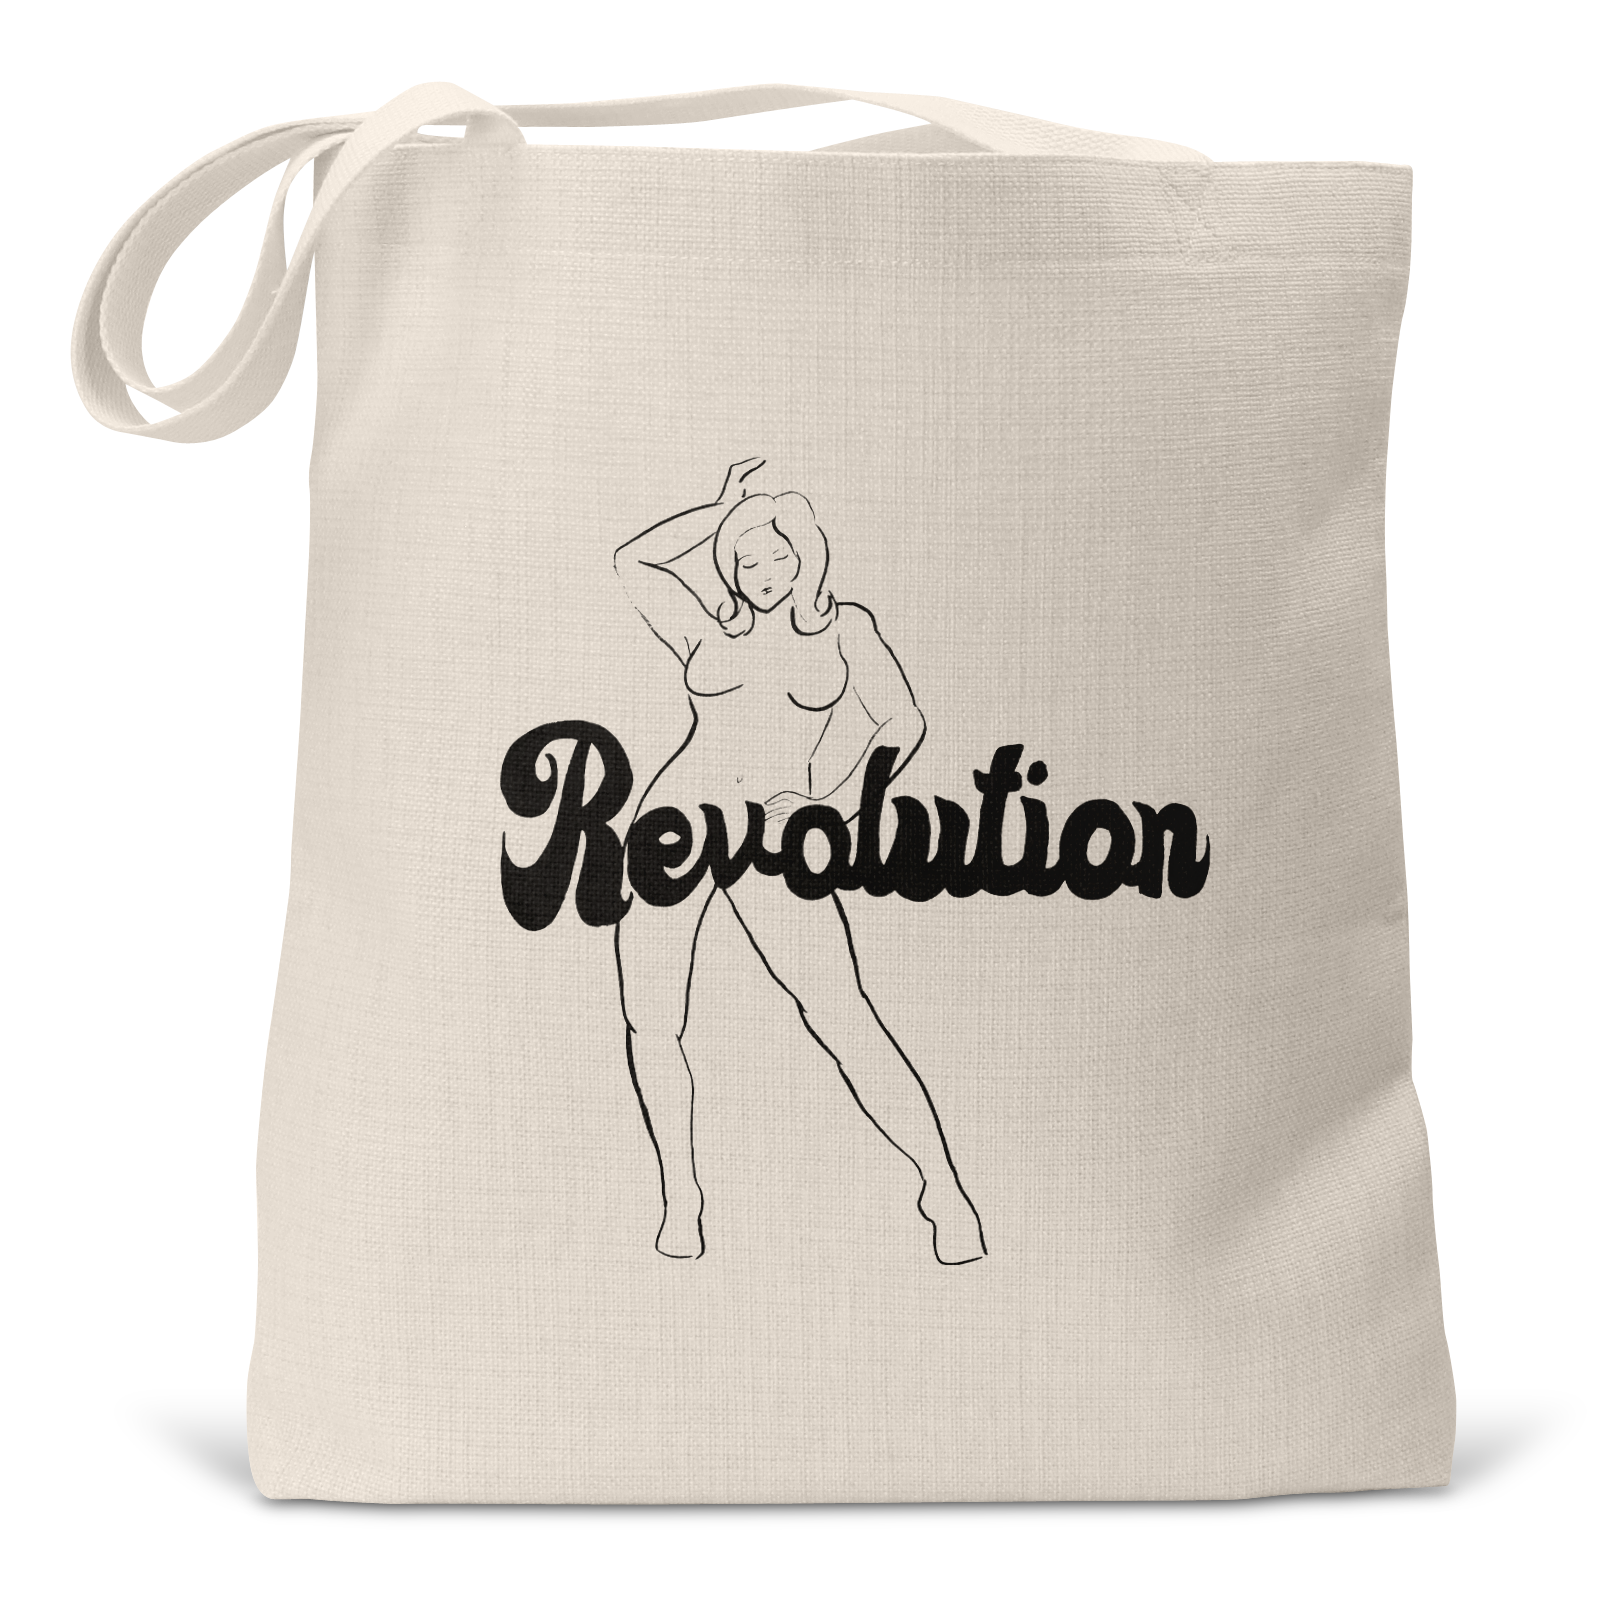 "Revolution" (V is for...) - Small Tote